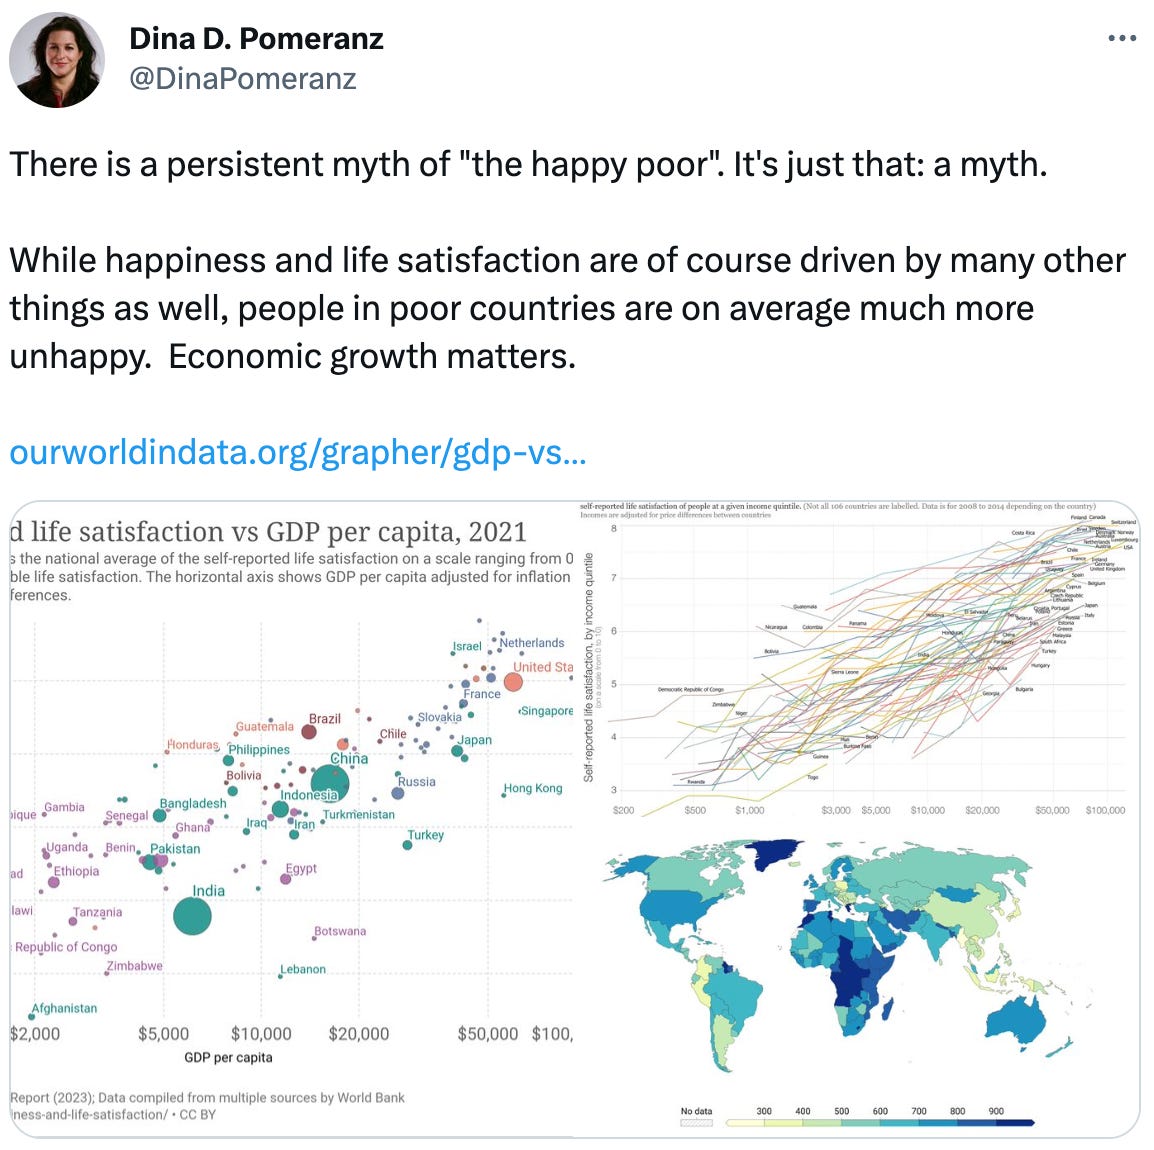  Dina D. Pomeranz @DinaPomeranz There is a persistent myth of "the happy poor". It's just that: a myth.  While happiness and life satisfaction are of course driven by many other things as well, people in poor countries are on average much more unhappy.  Economic growth matters.  https://ourworldindata.org/grapher/gdp-vs-happiness